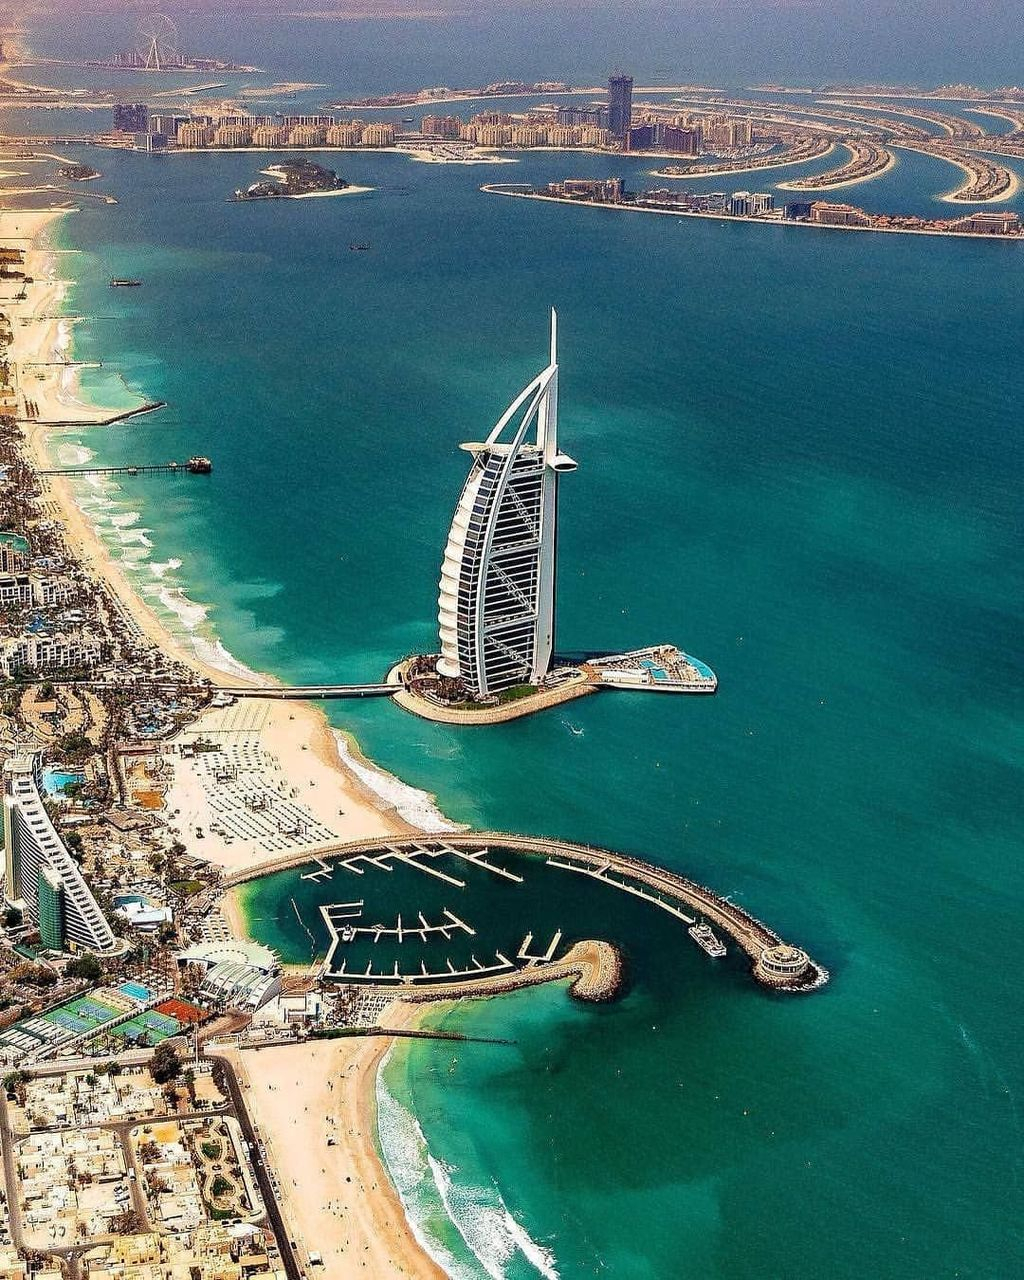 Awesome Photos Of Dubai To Make You Want To Visit It03